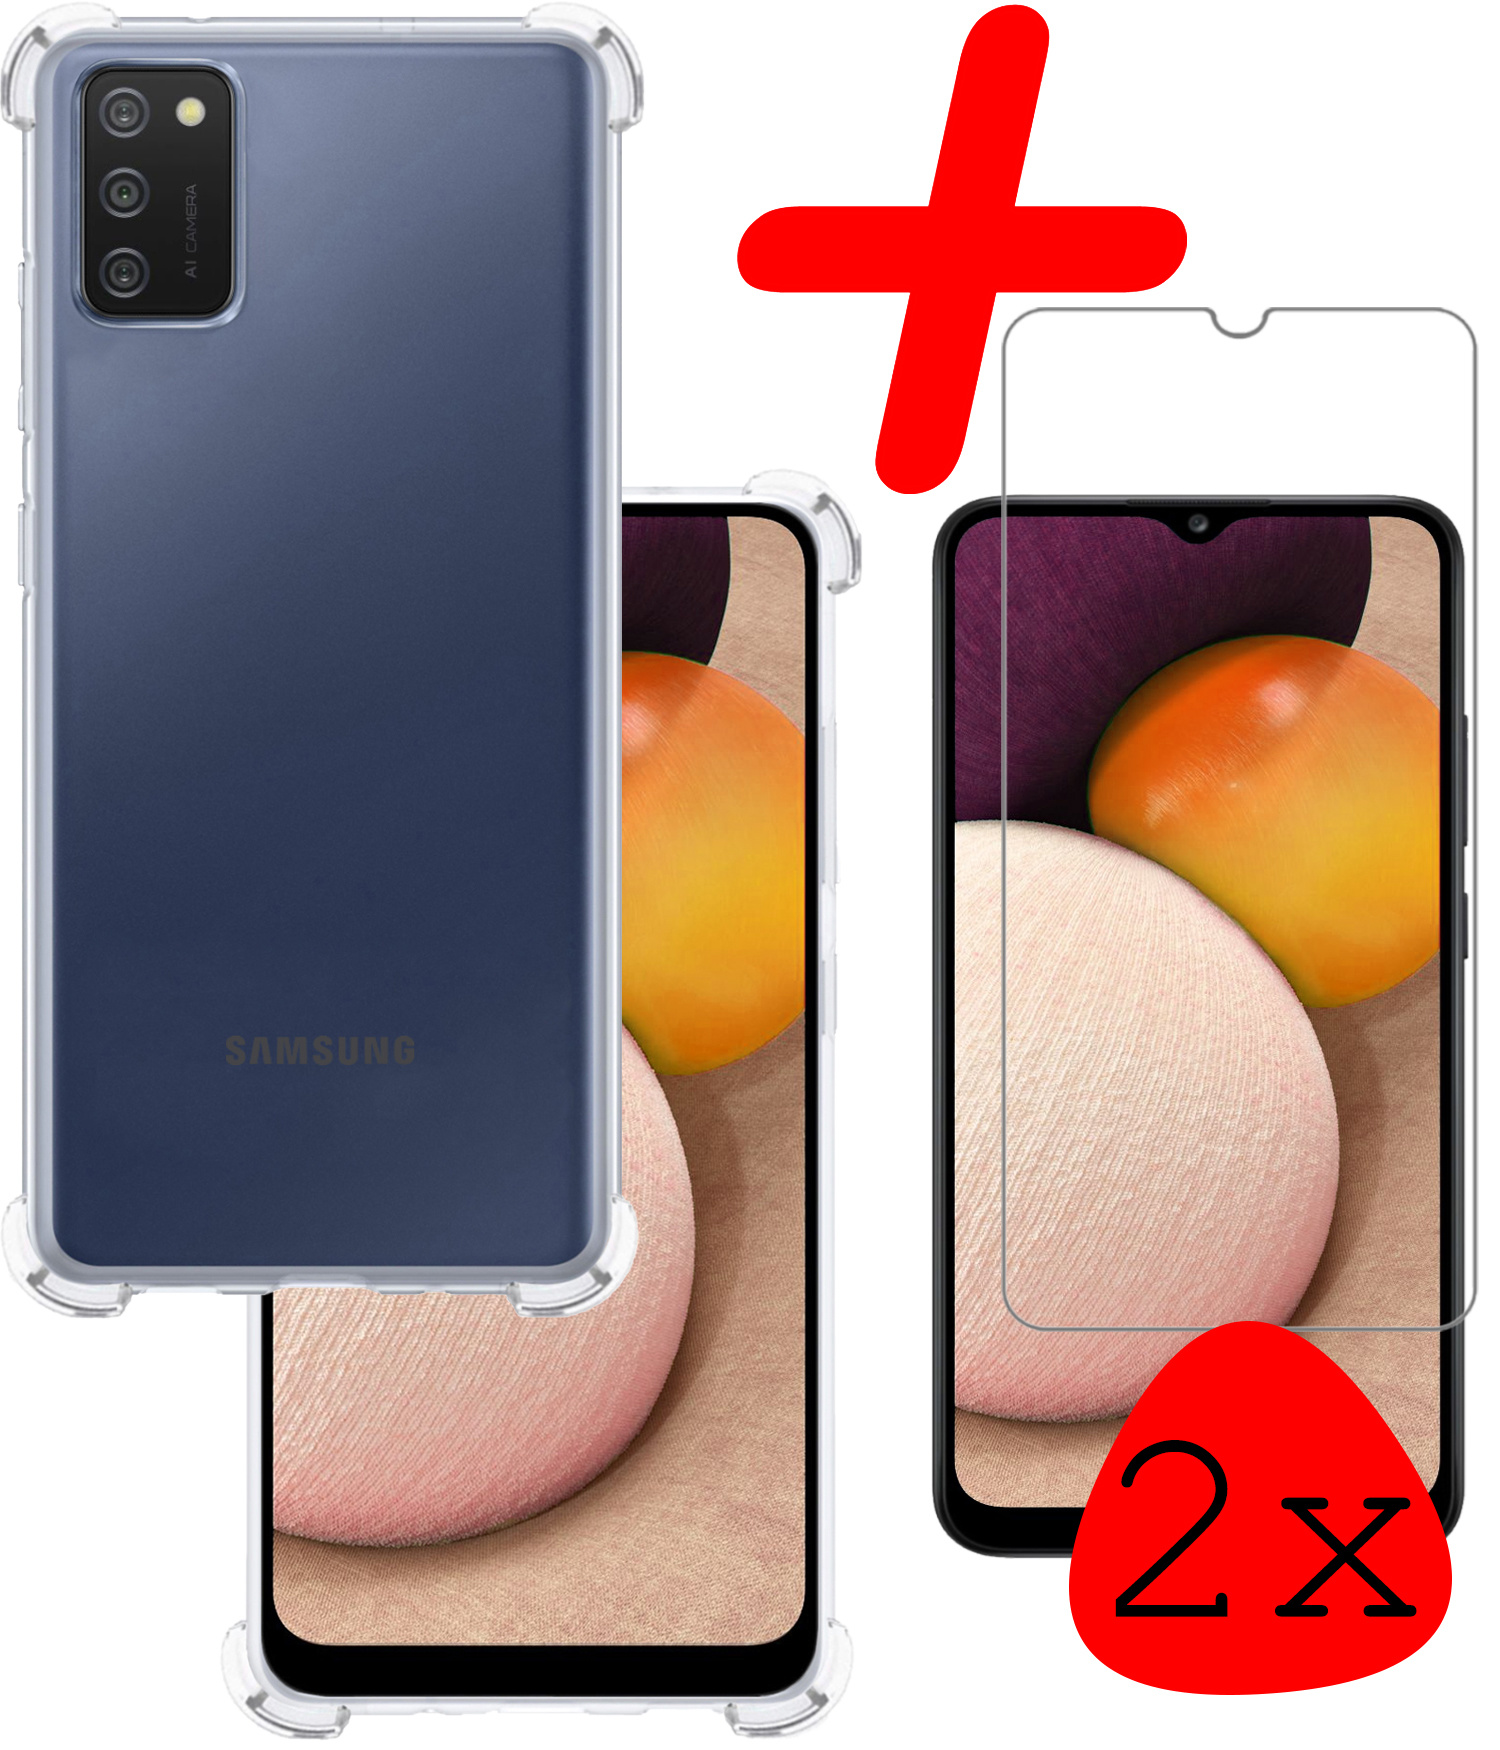 BASEY. Samsung Galaxy A03s Hoesje Shock Proof Met 2x Screenprotector Tempered Glass - Samsung Galaxy A03s Screen Protector Beschermglas Hoes Shockproof - Transparant